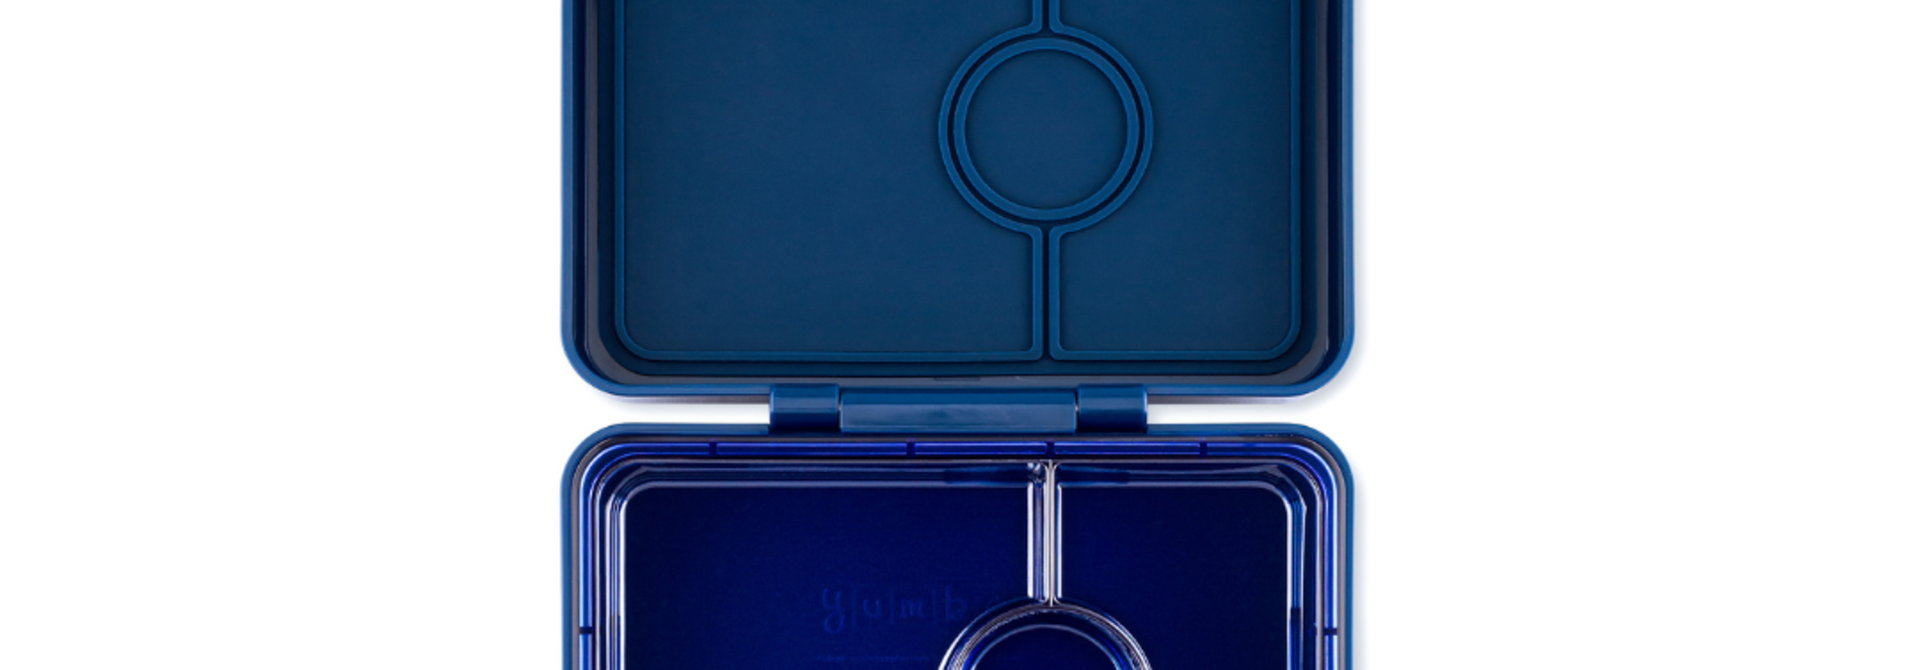 Yumbox Snack size Bento box 3-sections Monte Carlo Blue / Navy clear tray